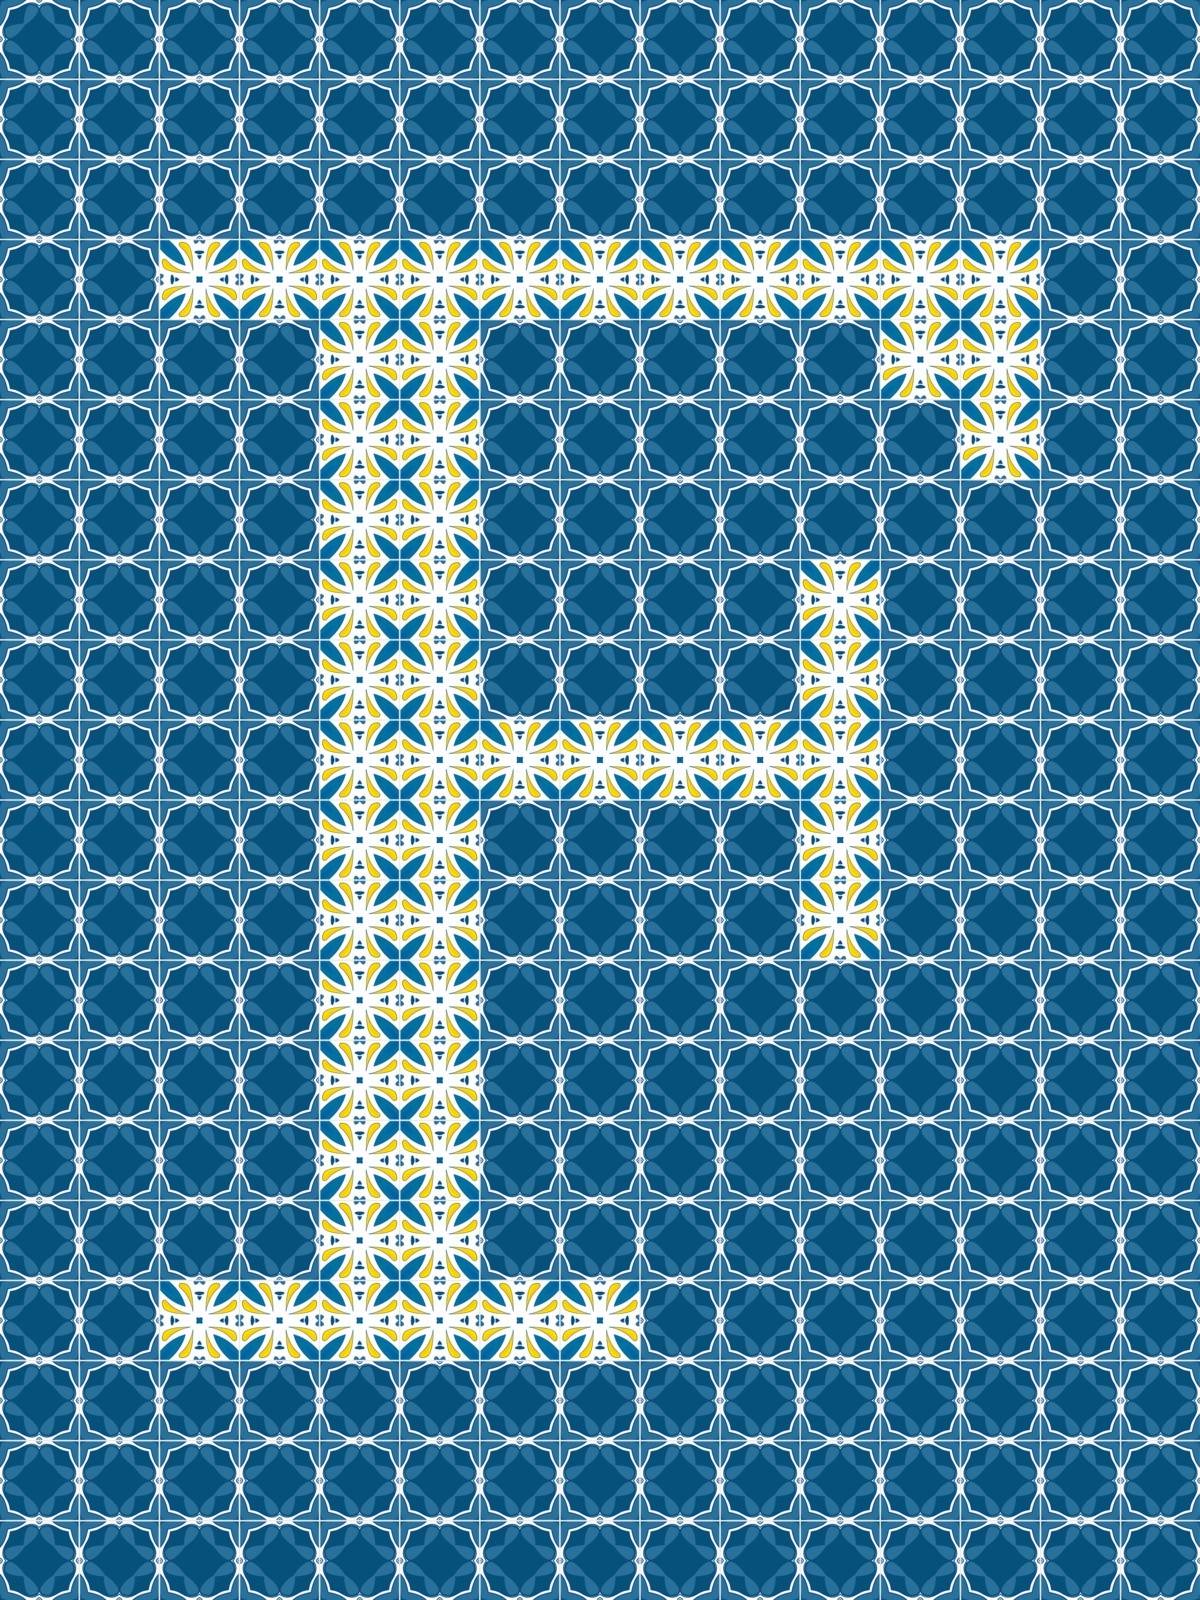 Capital letter F made of Portuguese tiles